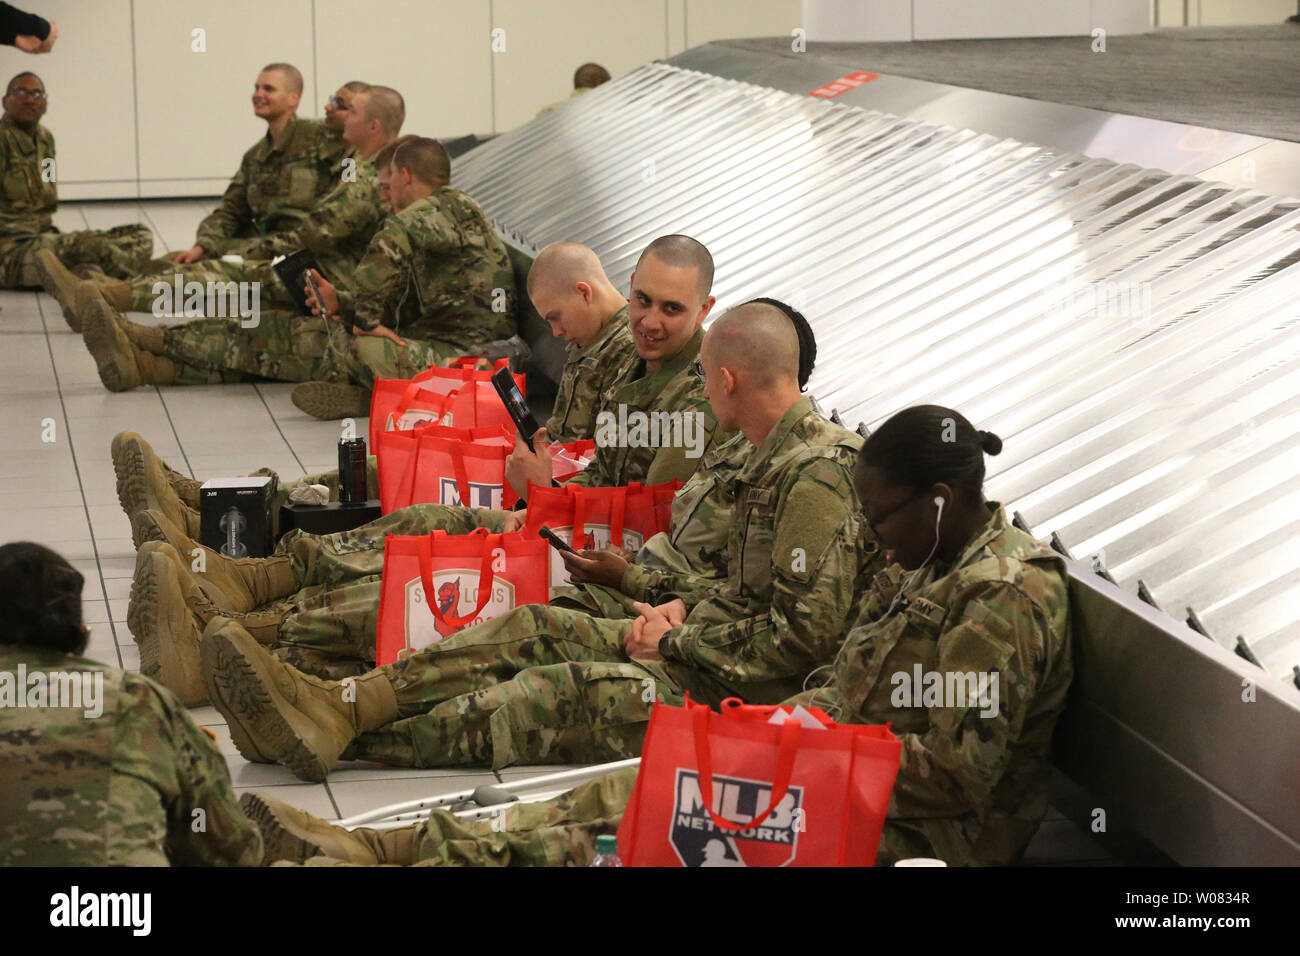 Soldiers from Fort Leonard Wood use the baggage carousel as support as they wait for their flights during Holiday Block Leave at St. Louis-Lambert International Airport in St. Louis on December 21, 2017. Nearly 4,000 men and women from the army training facility will board airplanes to go home for two weeks to celebrate the Christmas holidays. Photo by Bill Greenblatt/UPI Stock Photo